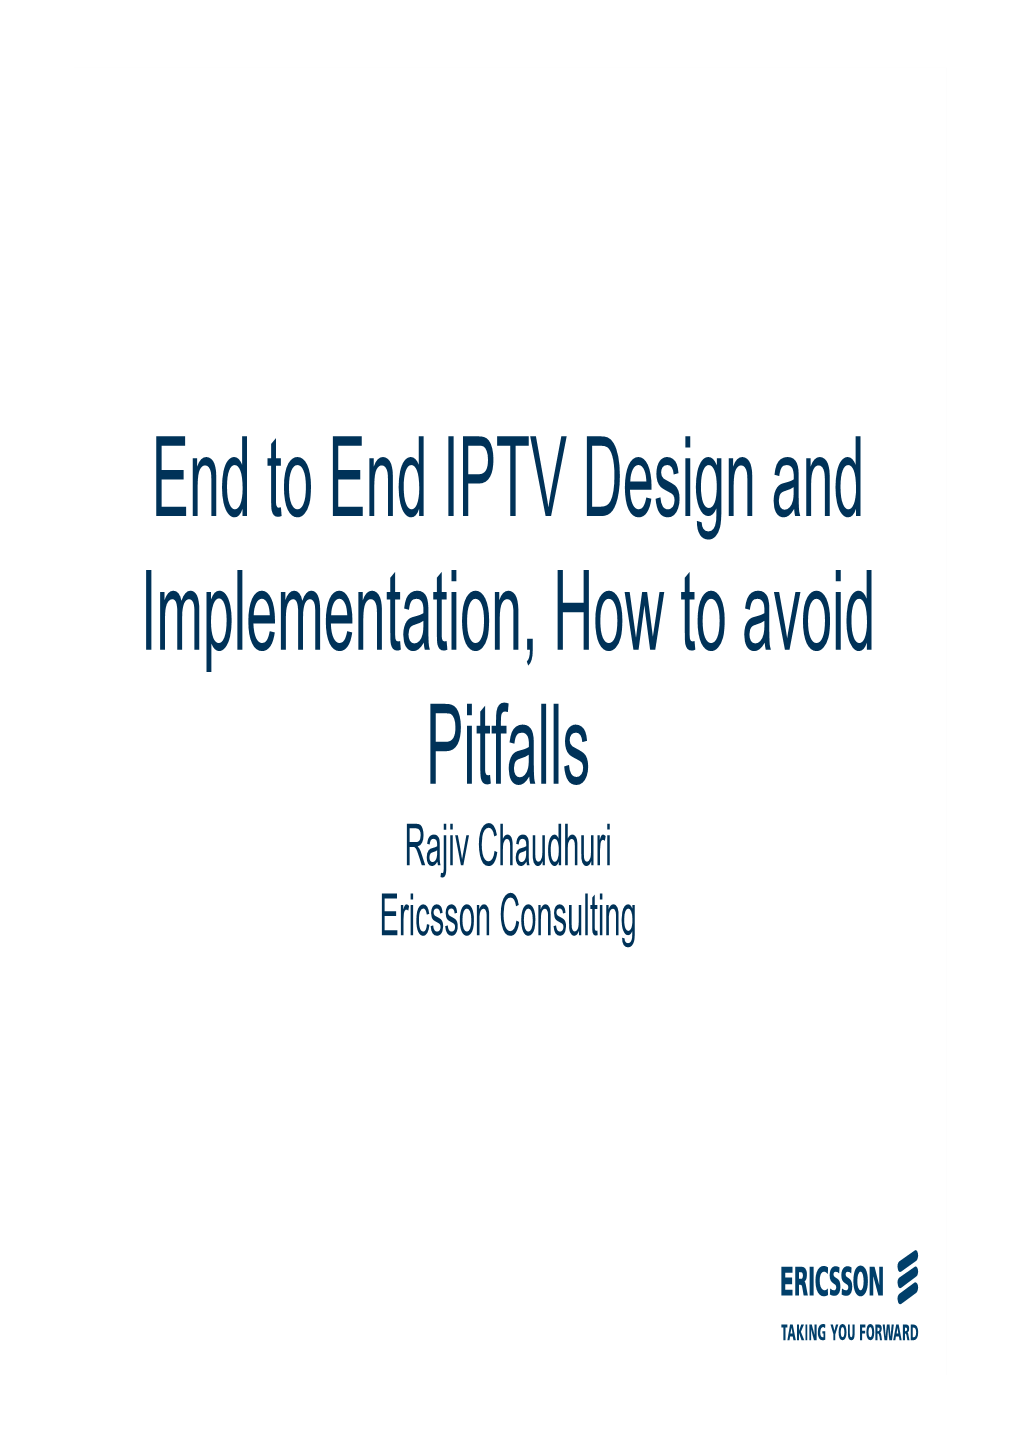 End to End IPTV Design and Implementation, How to Avoid Pitfalls Rajiv Chaudhuri Ericsson Consulting Agenda for the IP TV Design Tutorial